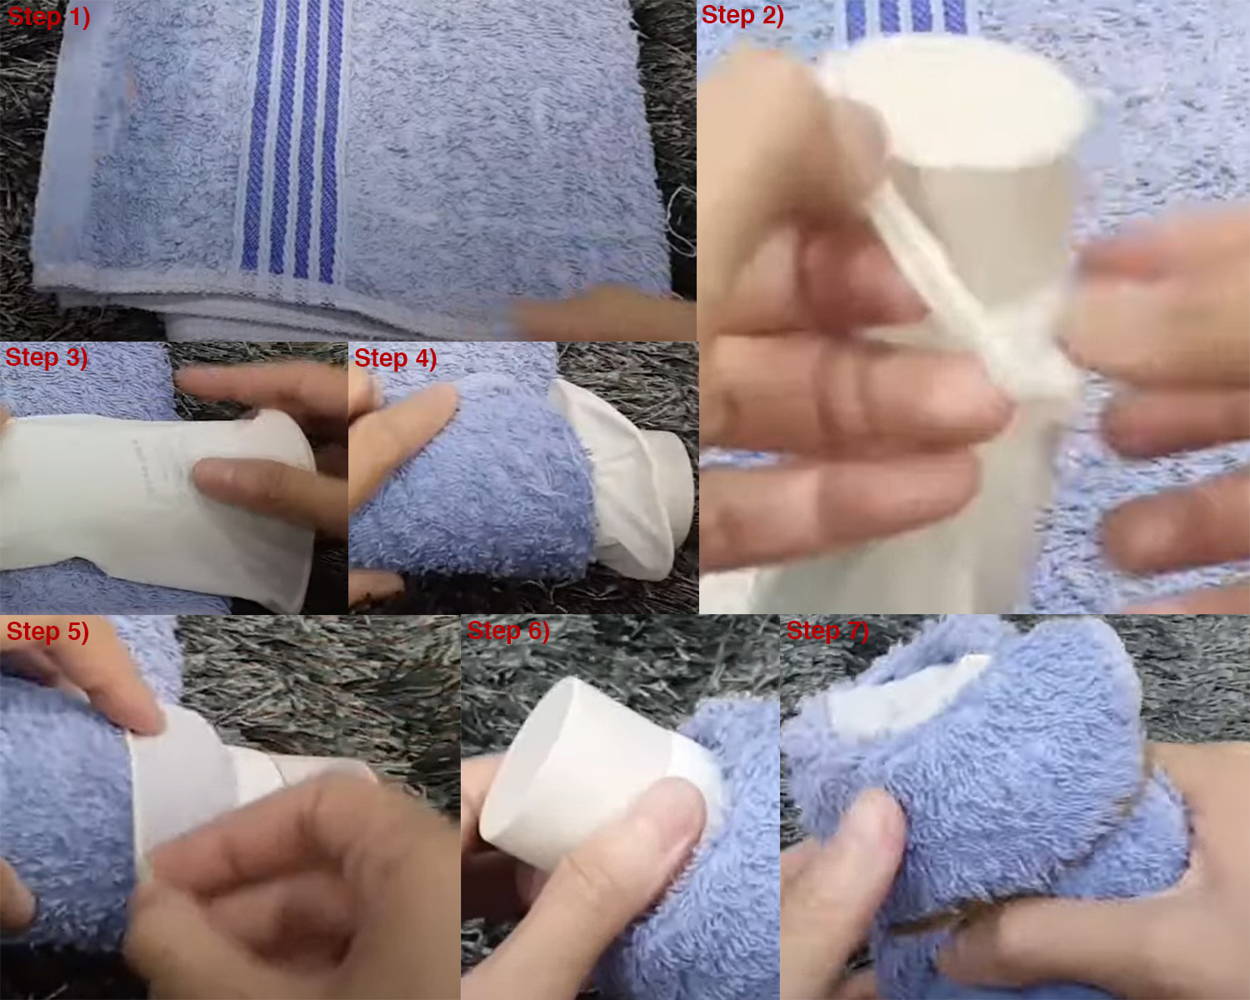 Homemade DIY Pocket Pussy made from a hand towel 2 | SxDolled